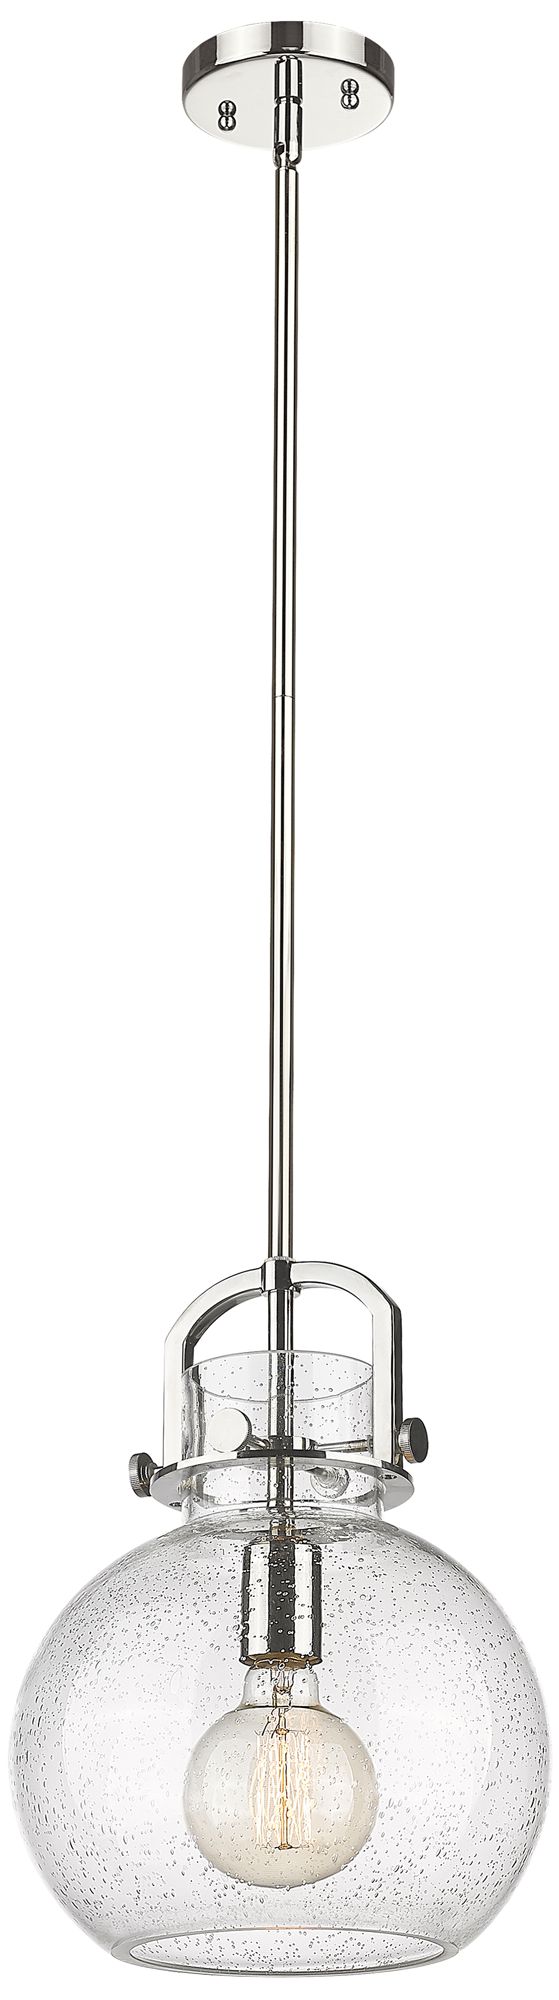 Newton Sphere 10" Wide Stem Hung Polished Nickel Pendant With Seedy Sh